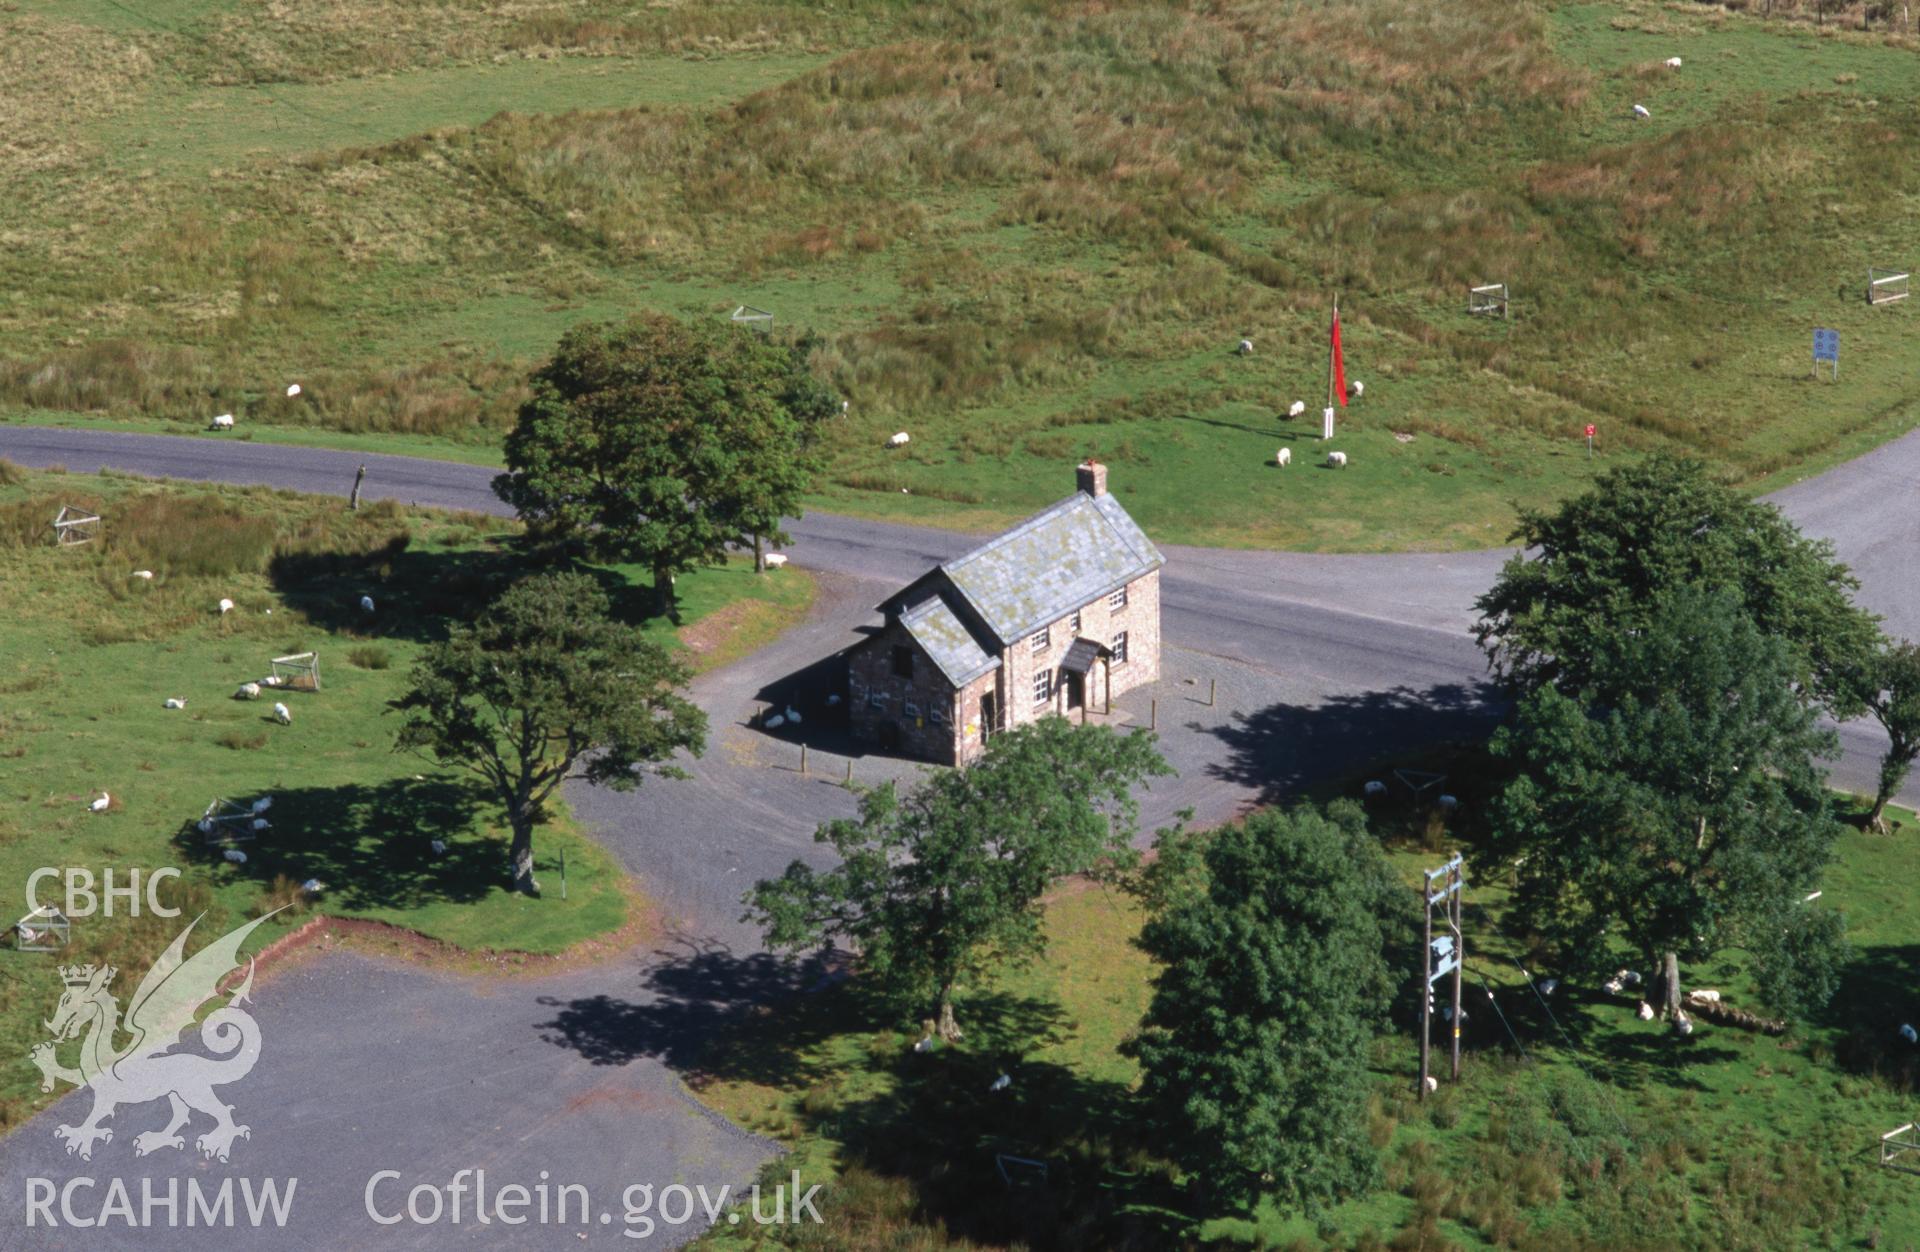 Slide of RCAHMW colour oblique aerial photograph of Drover's Arms, Duhonw, taken by T.G. Driver, 27/8/1998.